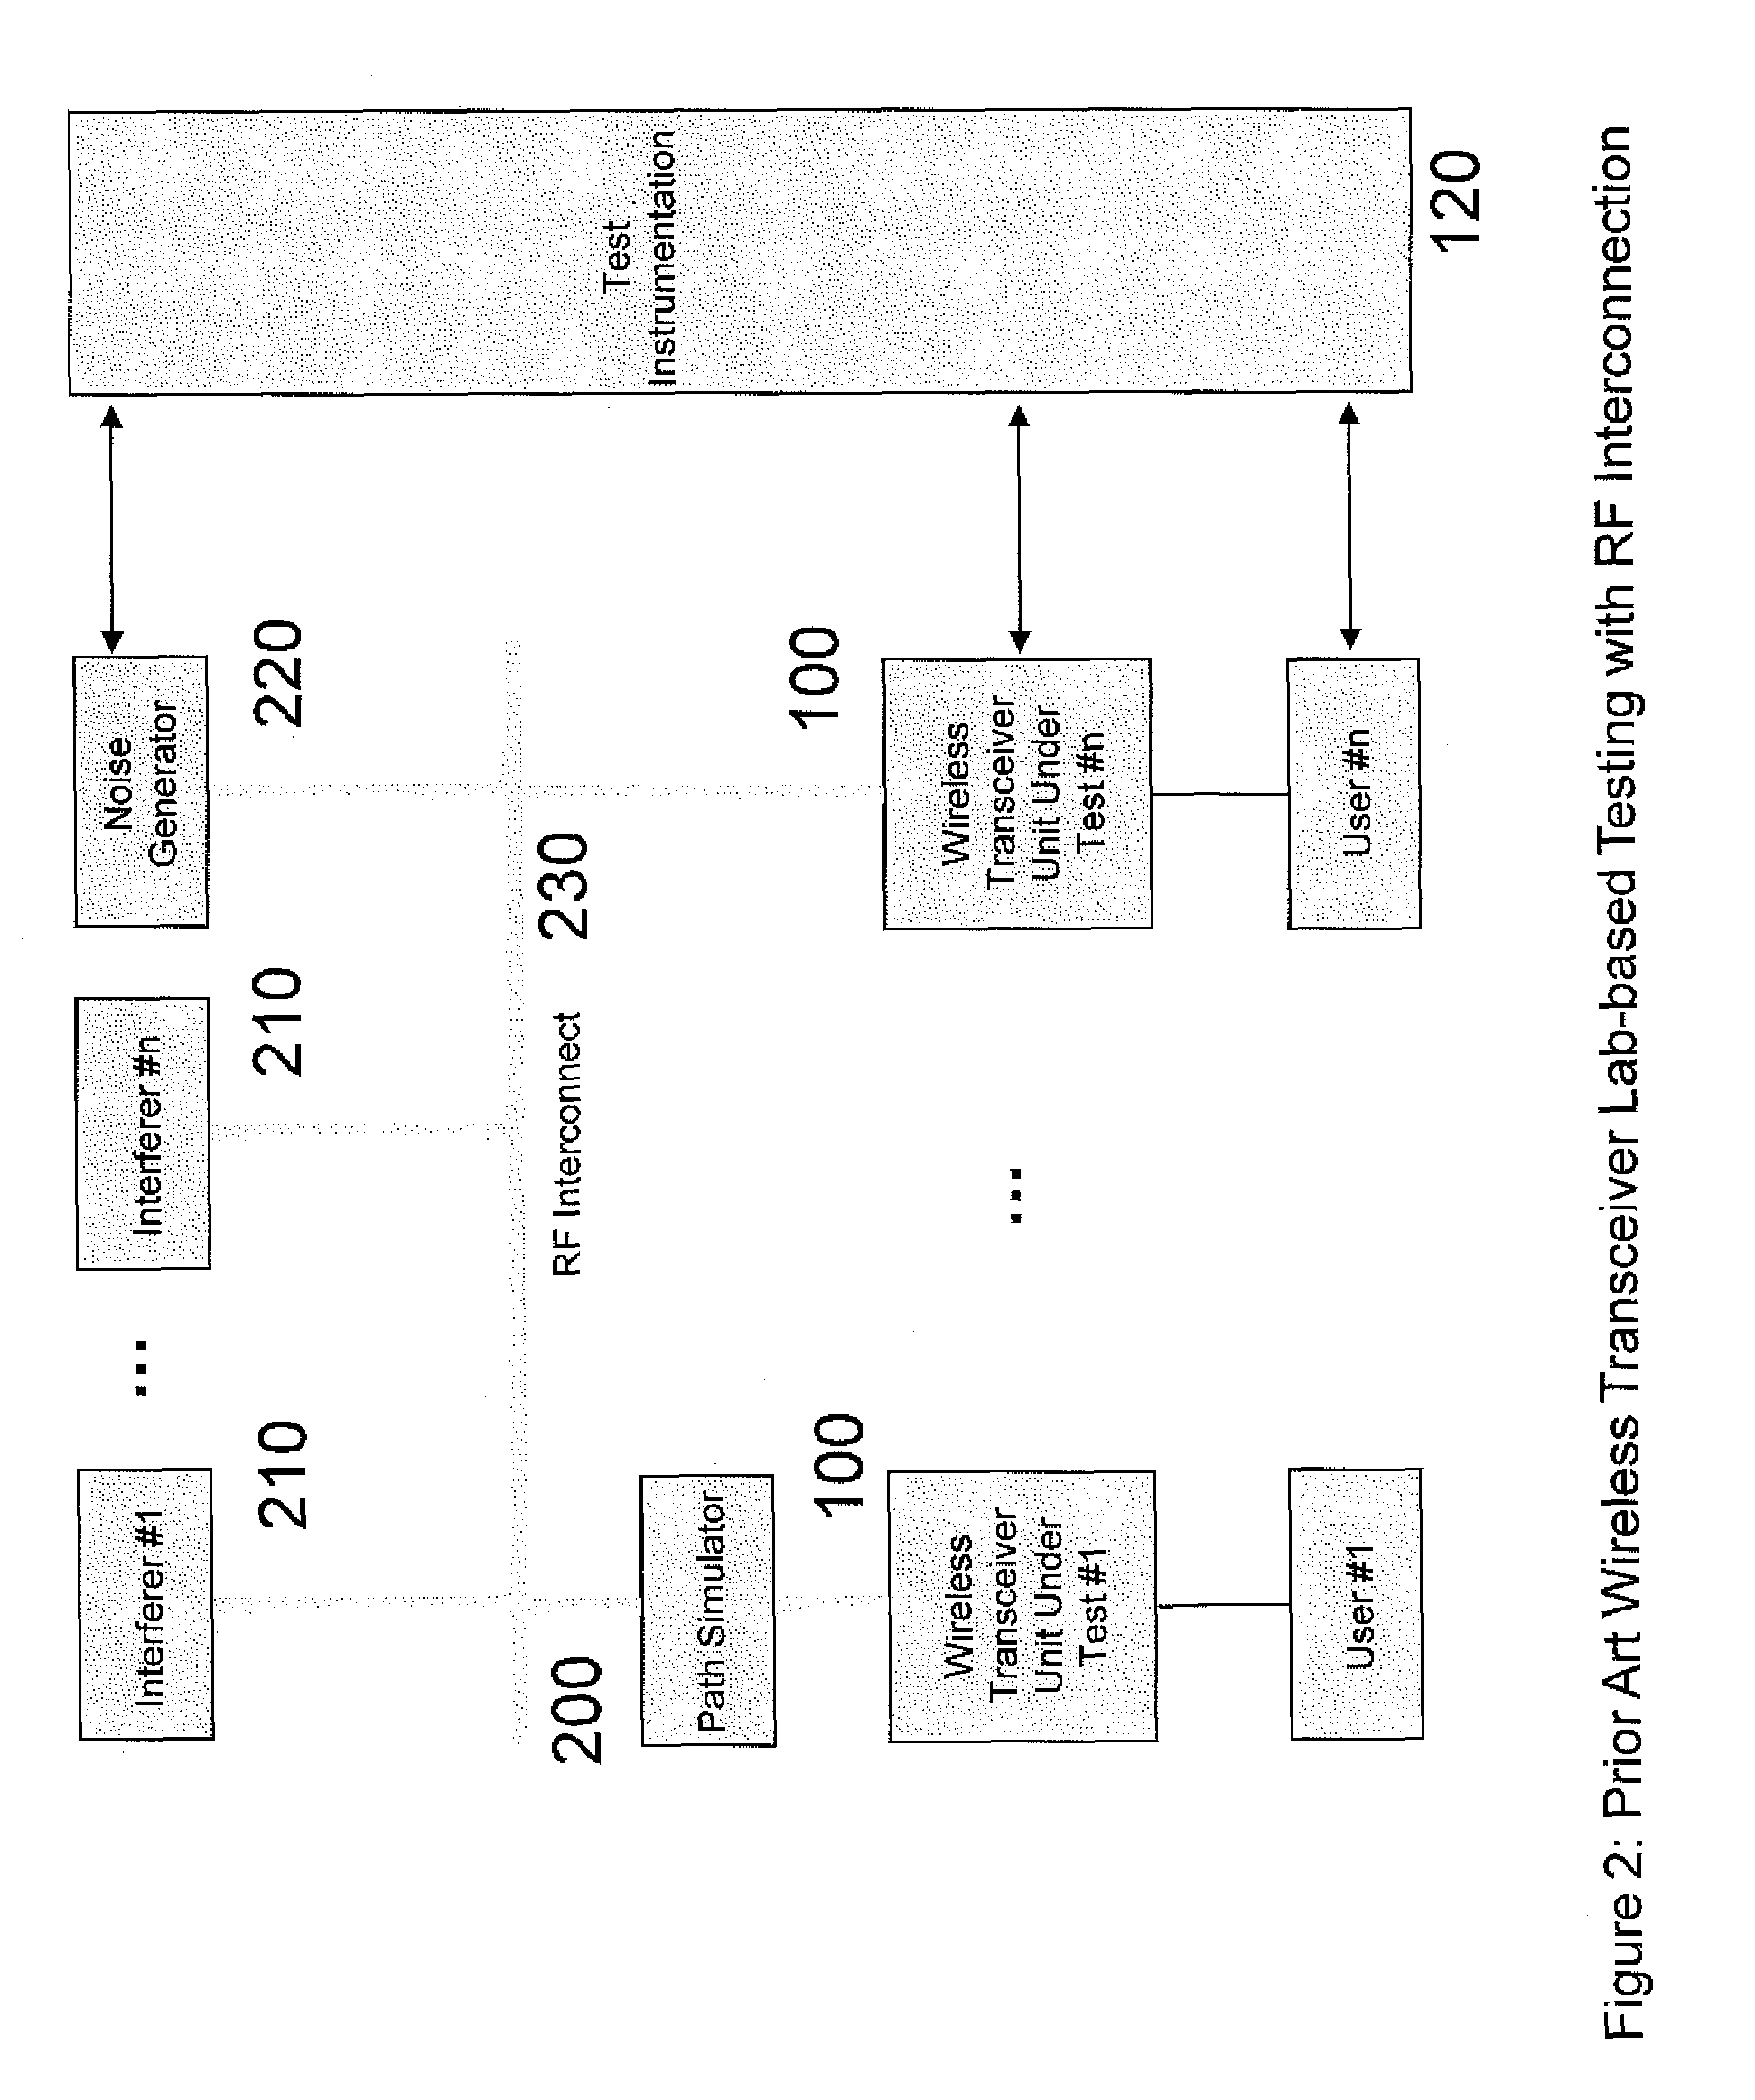 Wireless transceiver test bed system and method